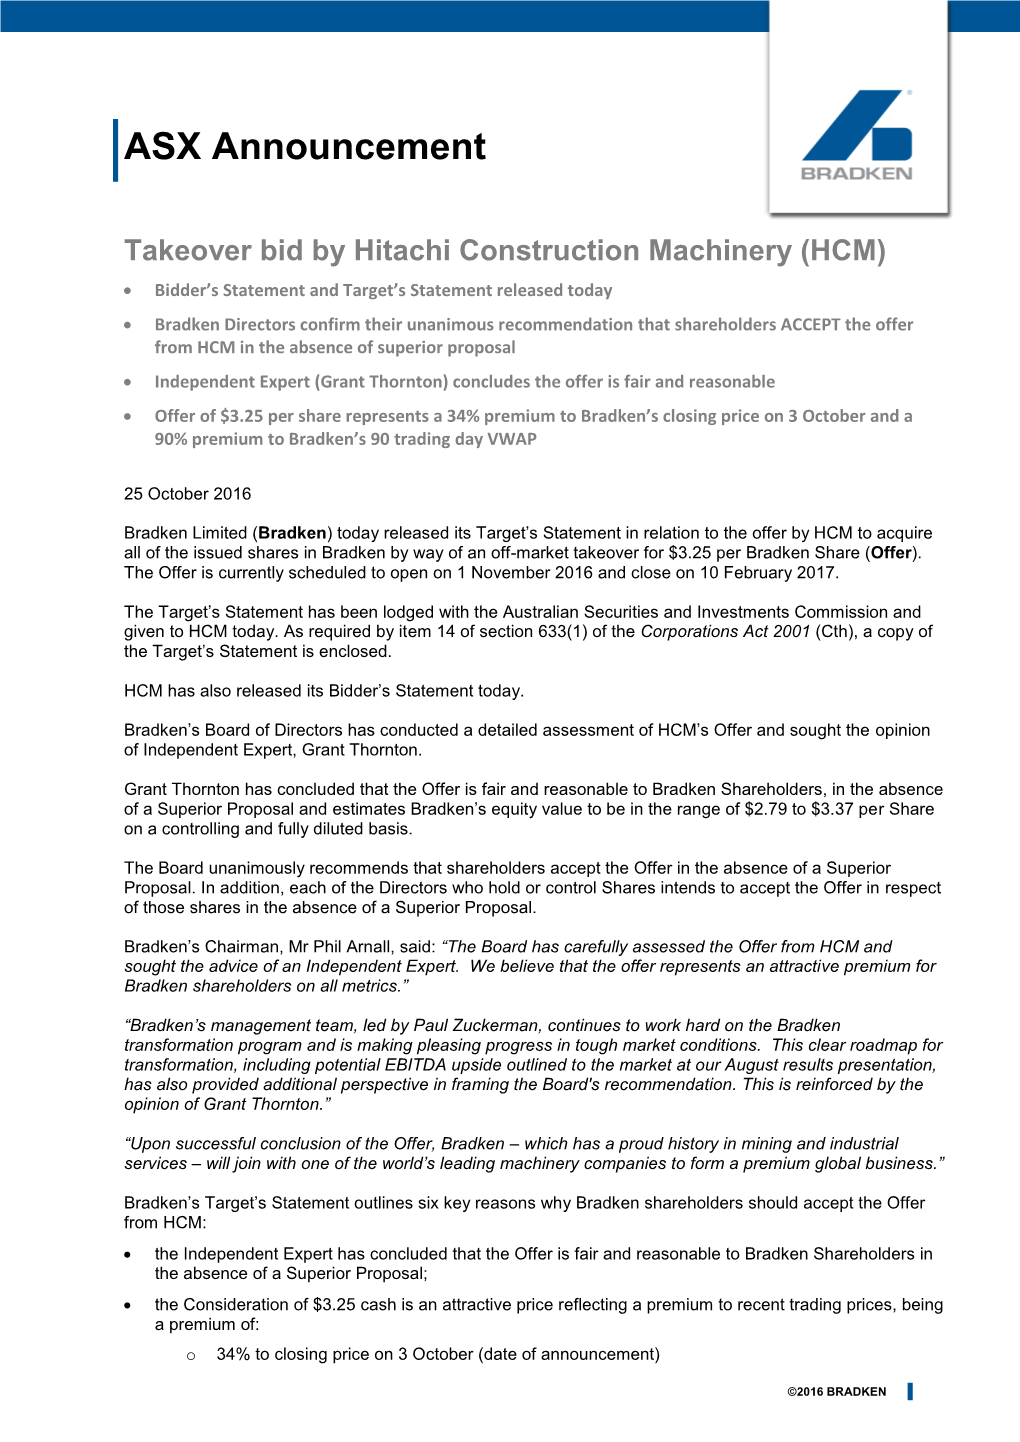 ASX Announcement Takeover Bid by Hitachi Construction Machinery